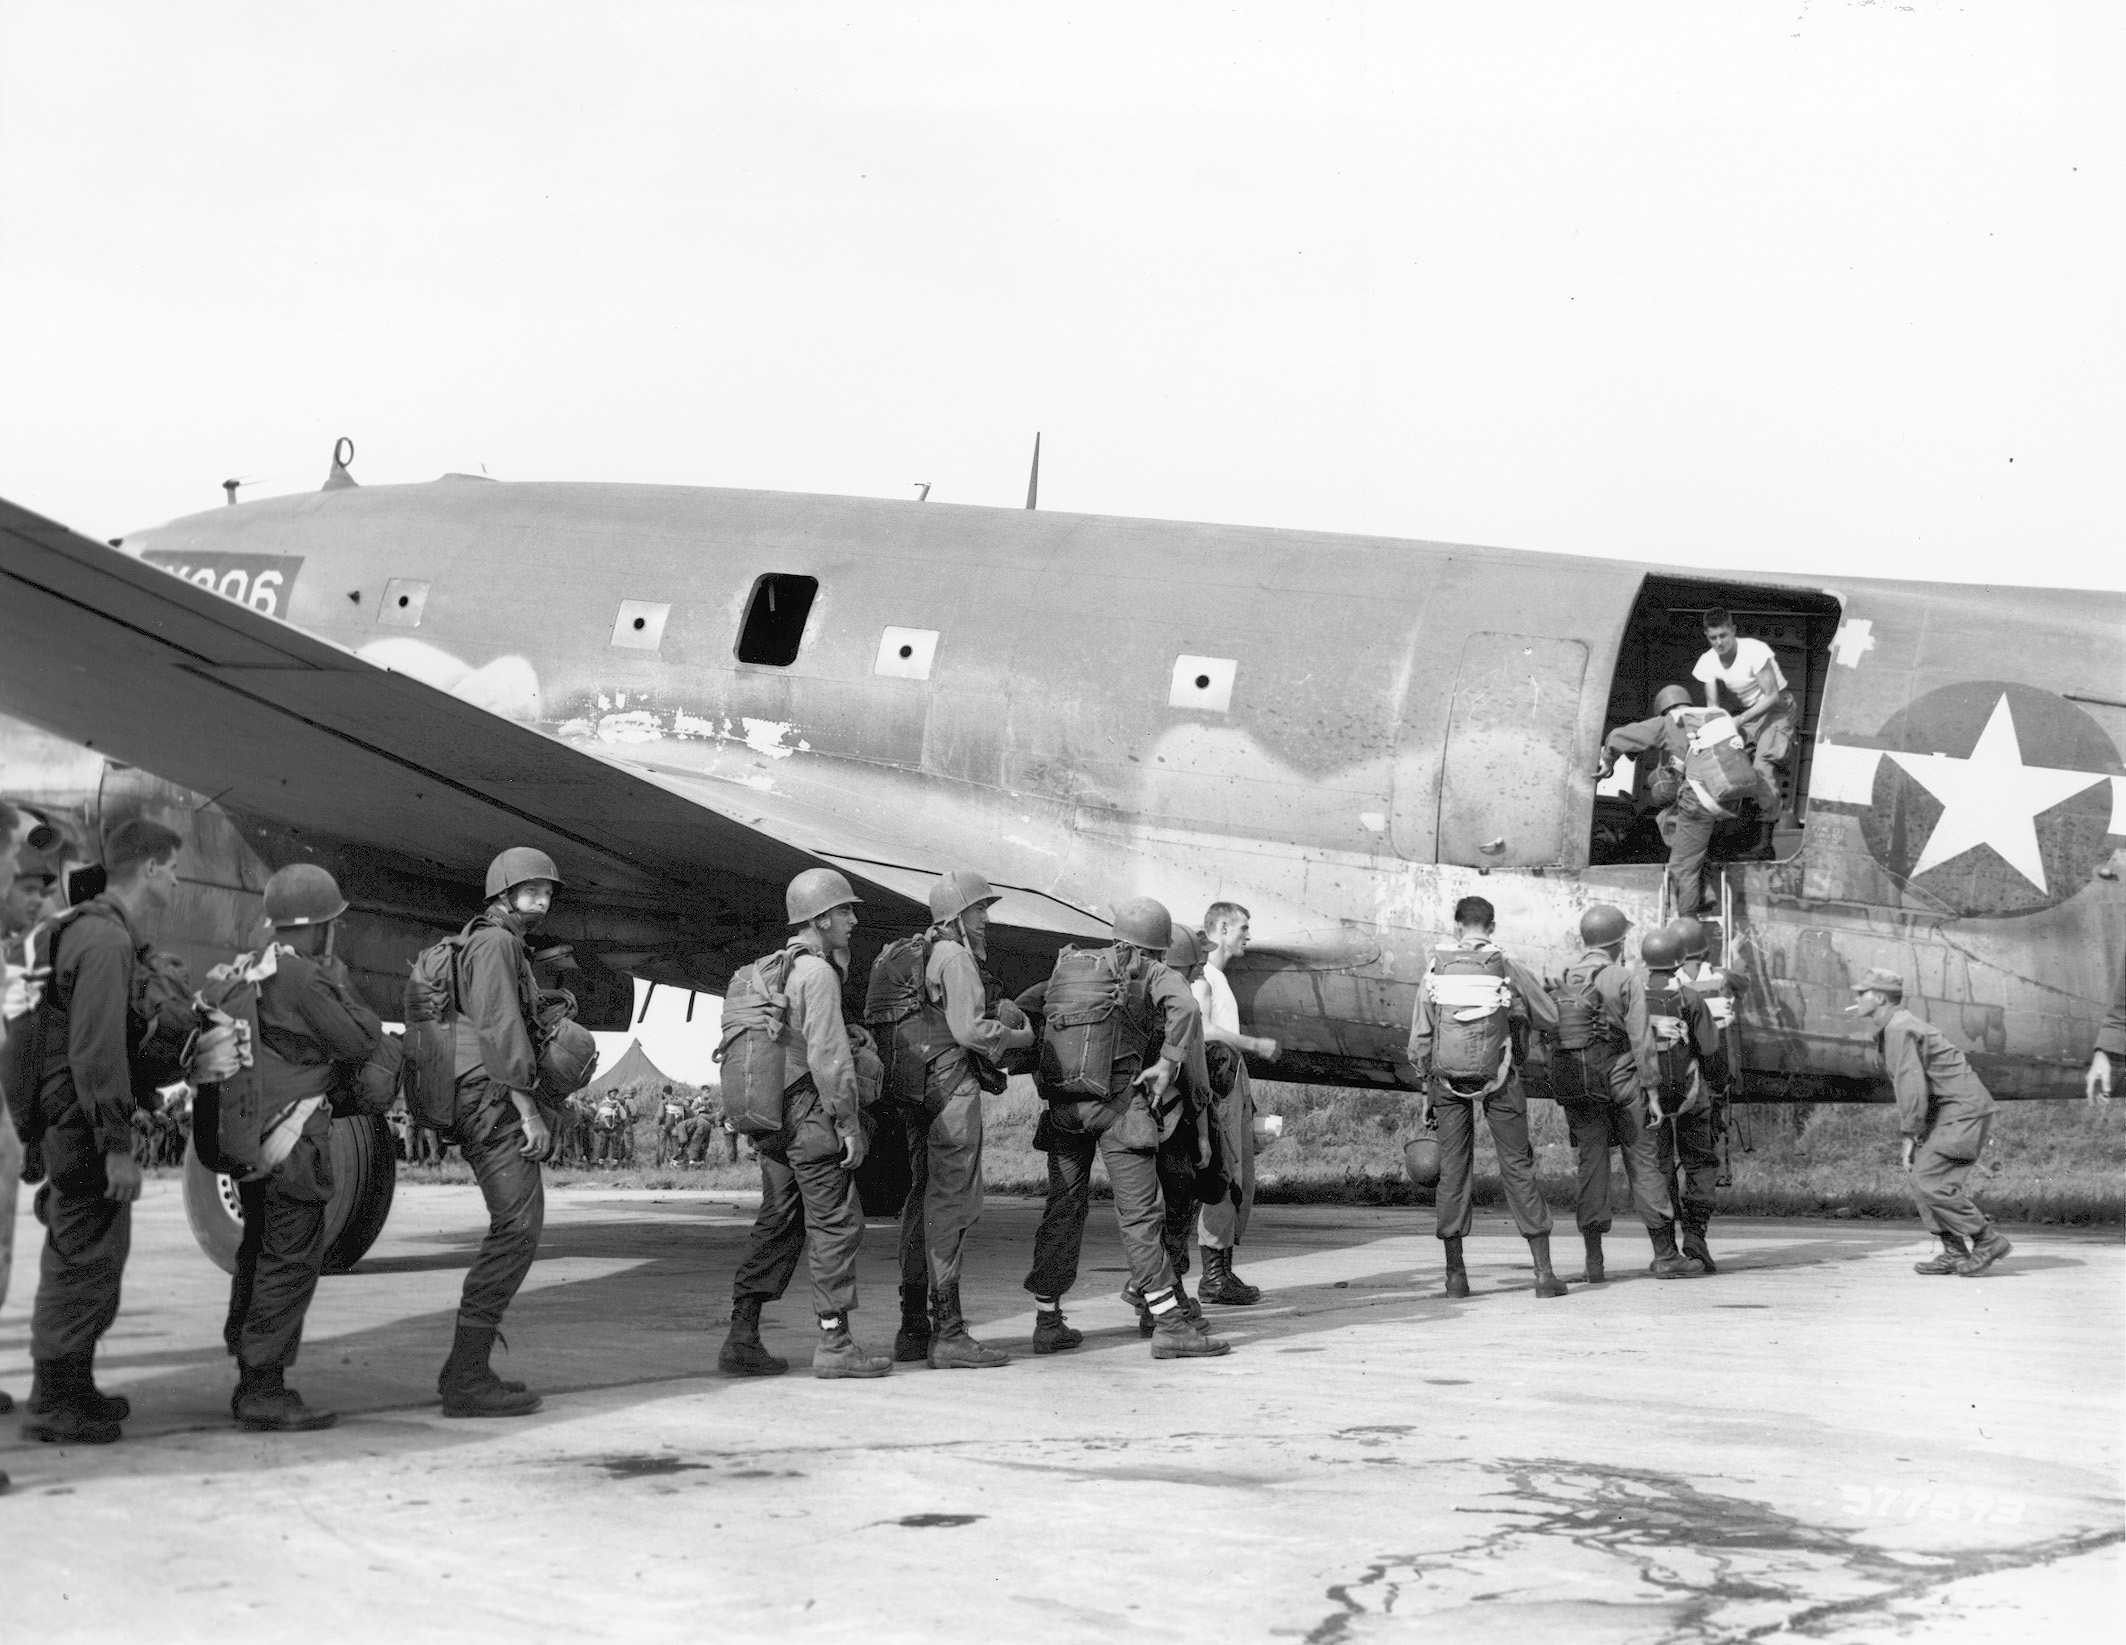 Men of the 11th Airborne board a plane for an impending jump.